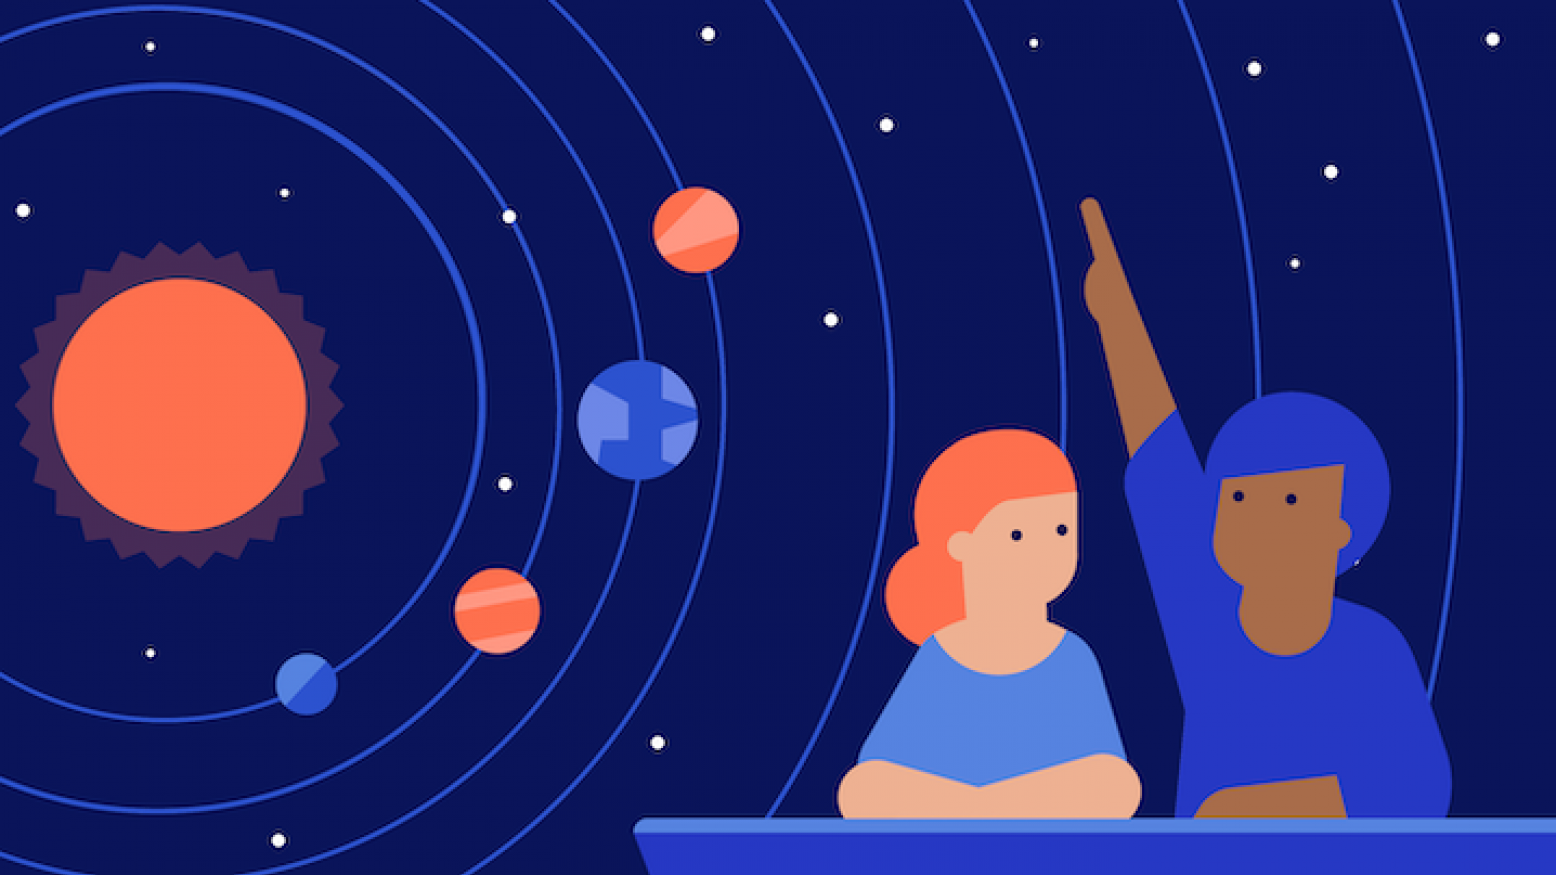 An illustration of two students sitting at a desk with the solar system behind them. The student on the right is raising his hand.